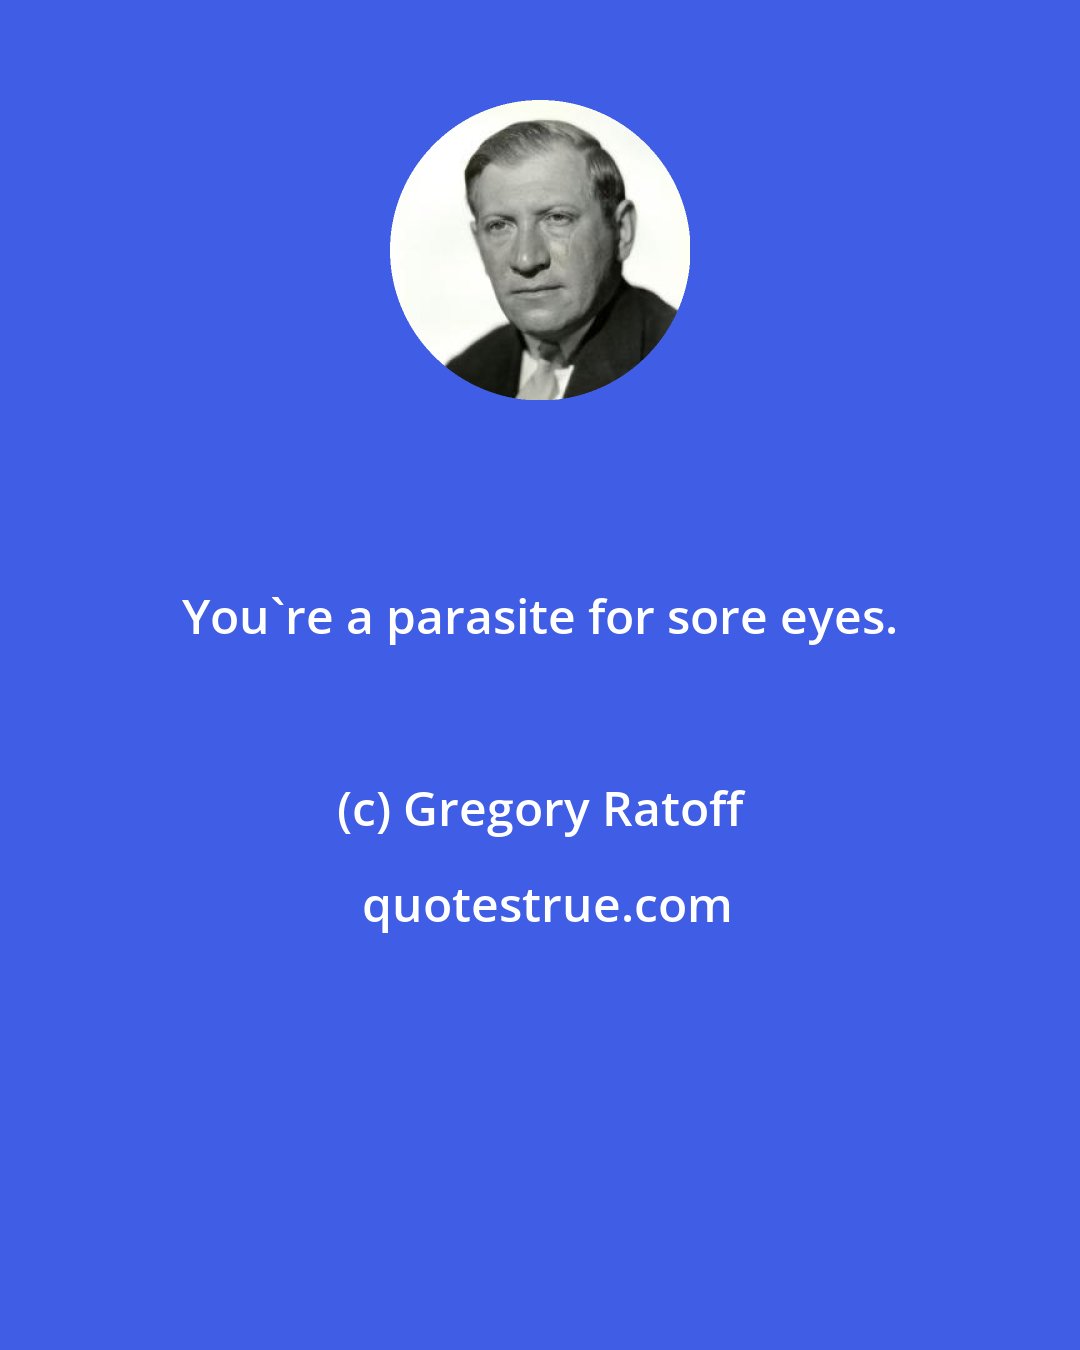 Gregory Ratoff: You're a parasite for sore eyes.